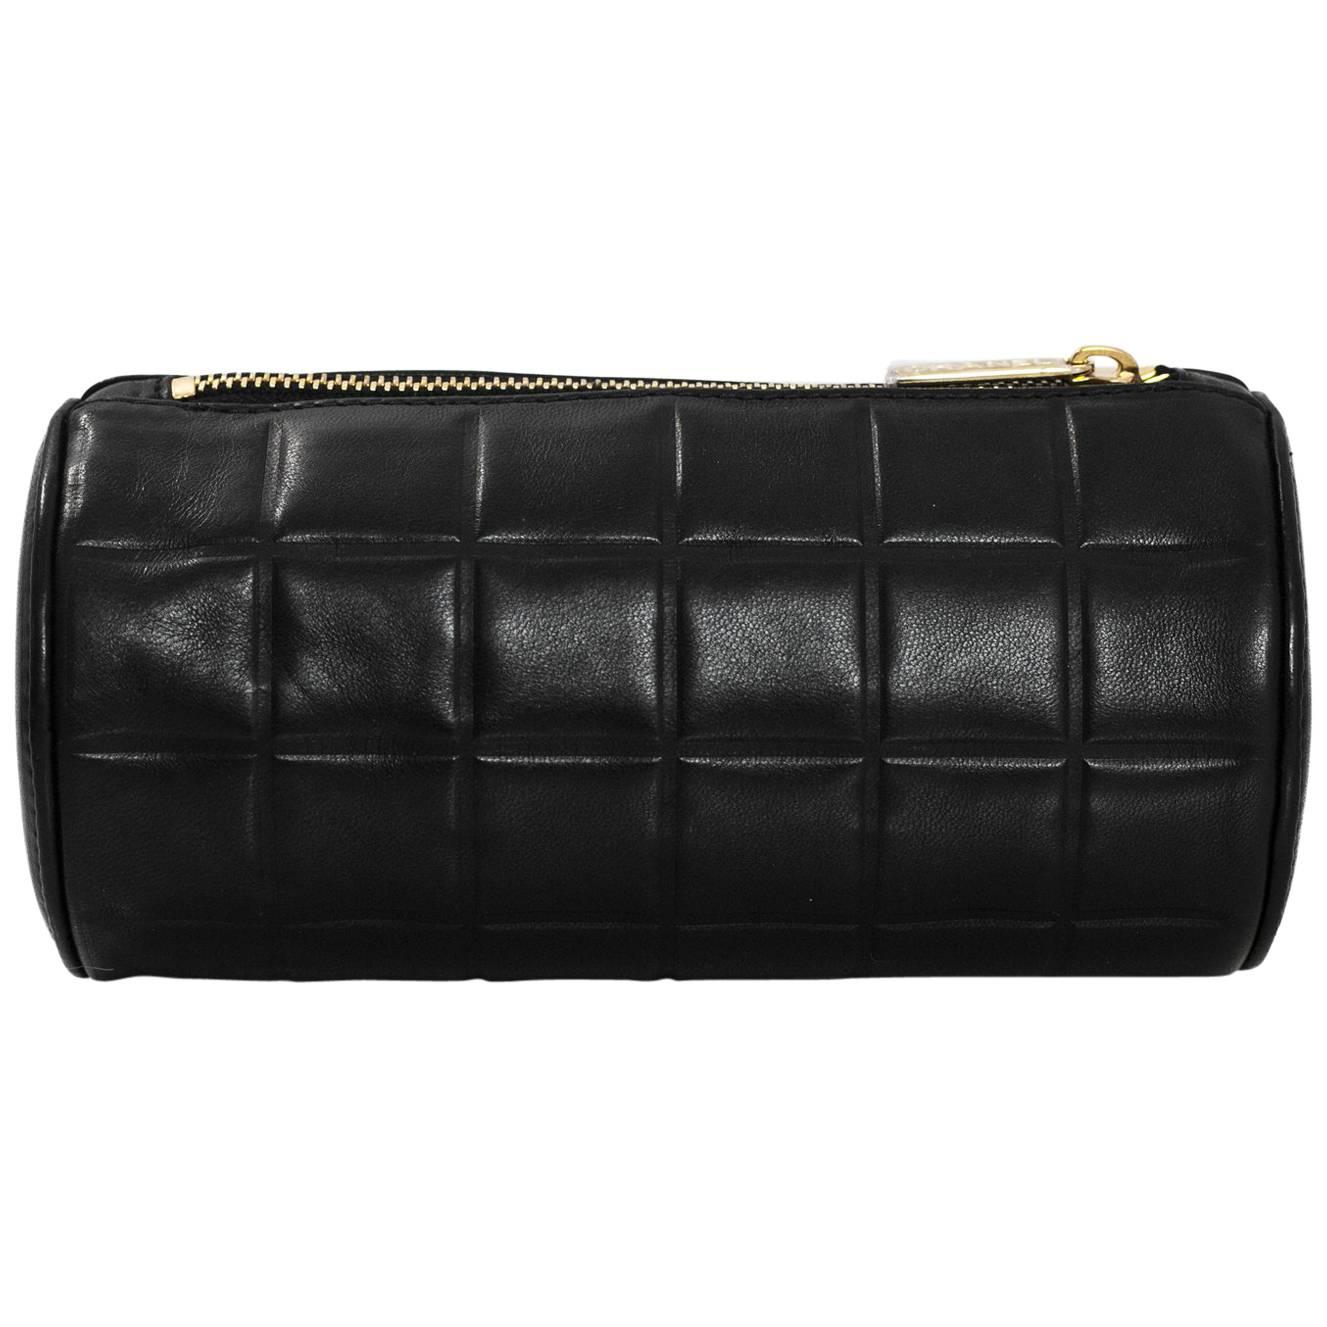 Chanel Black Lambskin Leather Square Quilted CC Cosmetic Case Bag